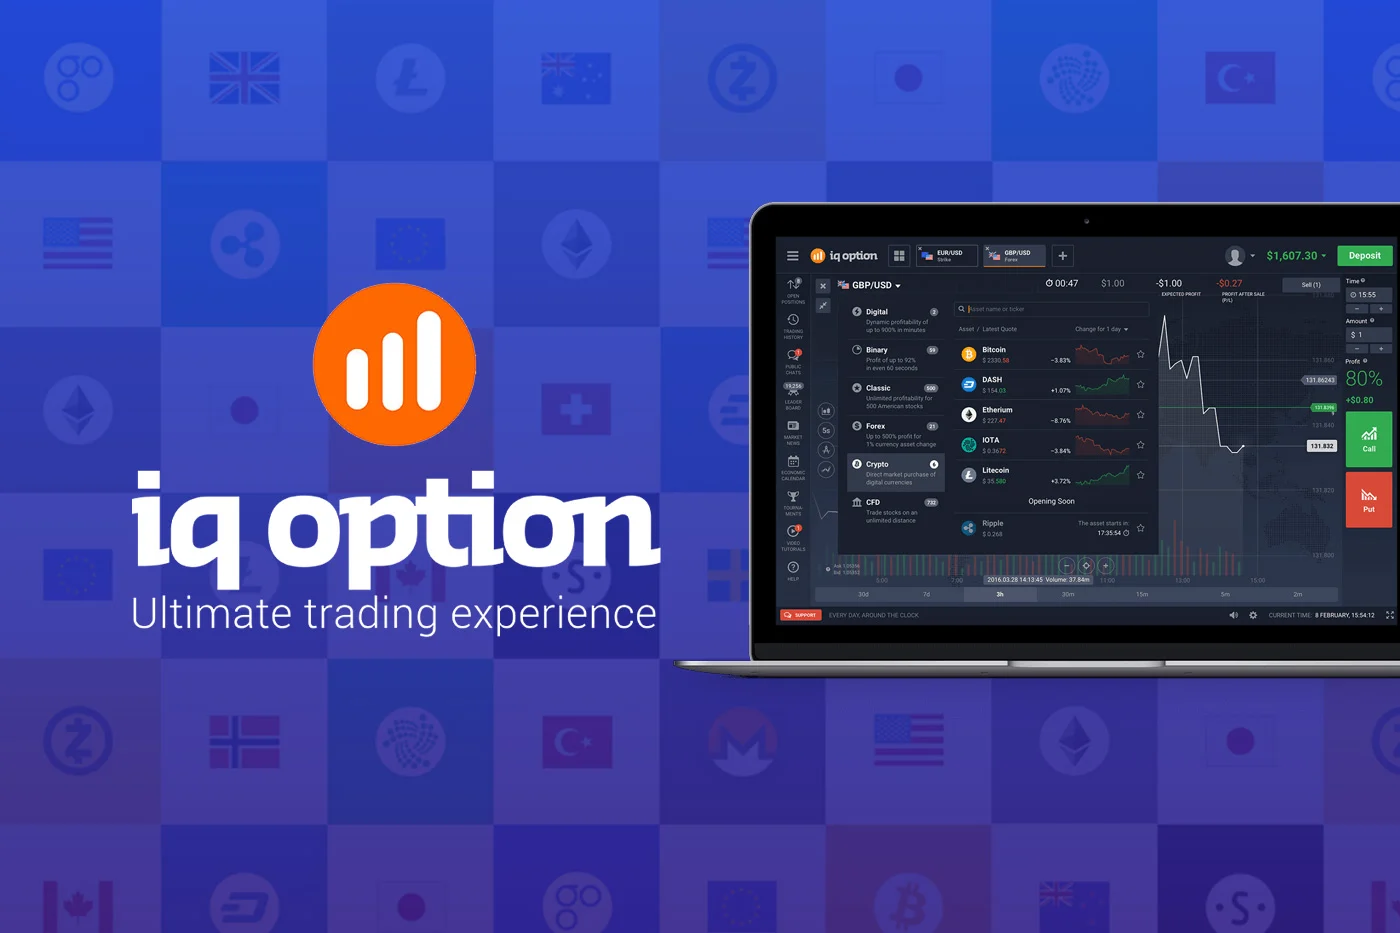 Binary options brokers that accept us clients 2020